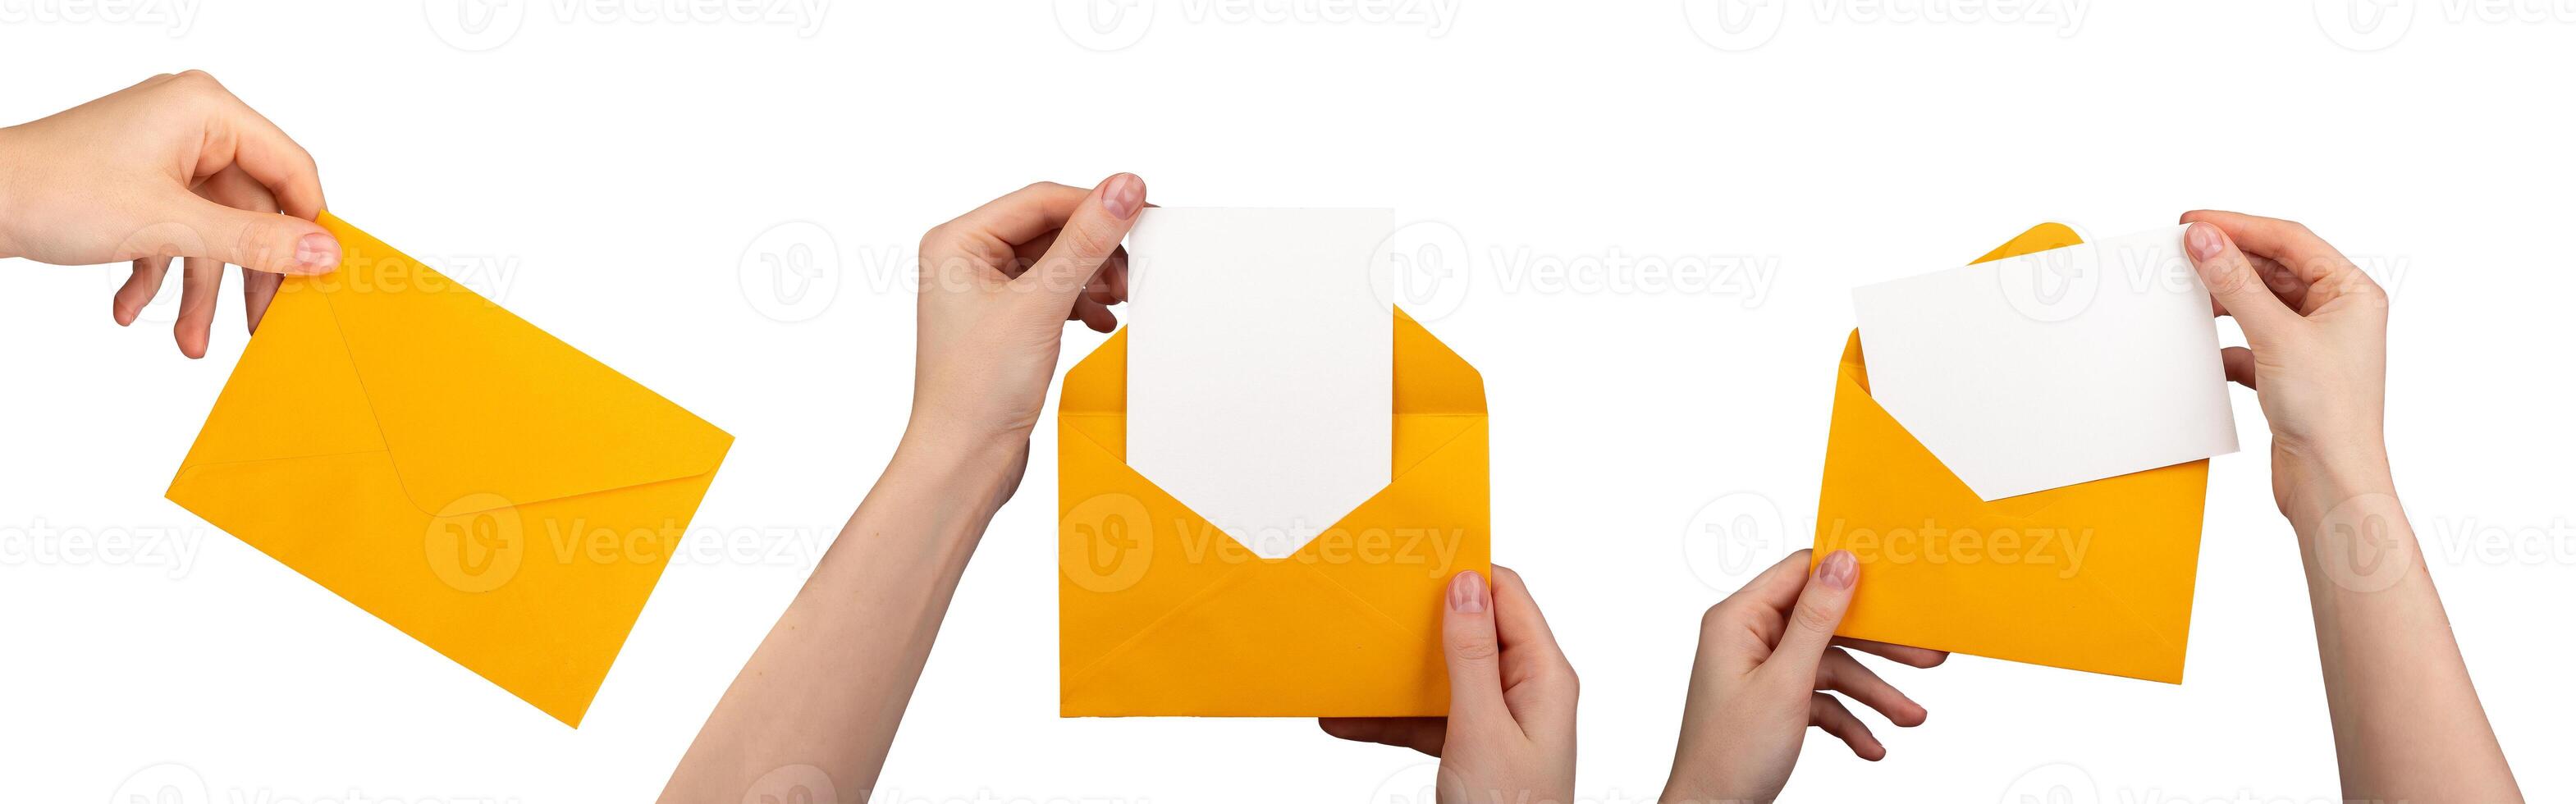 Hand holding closed envelope, opening mail with paper, cards mockups set isolated on white photo